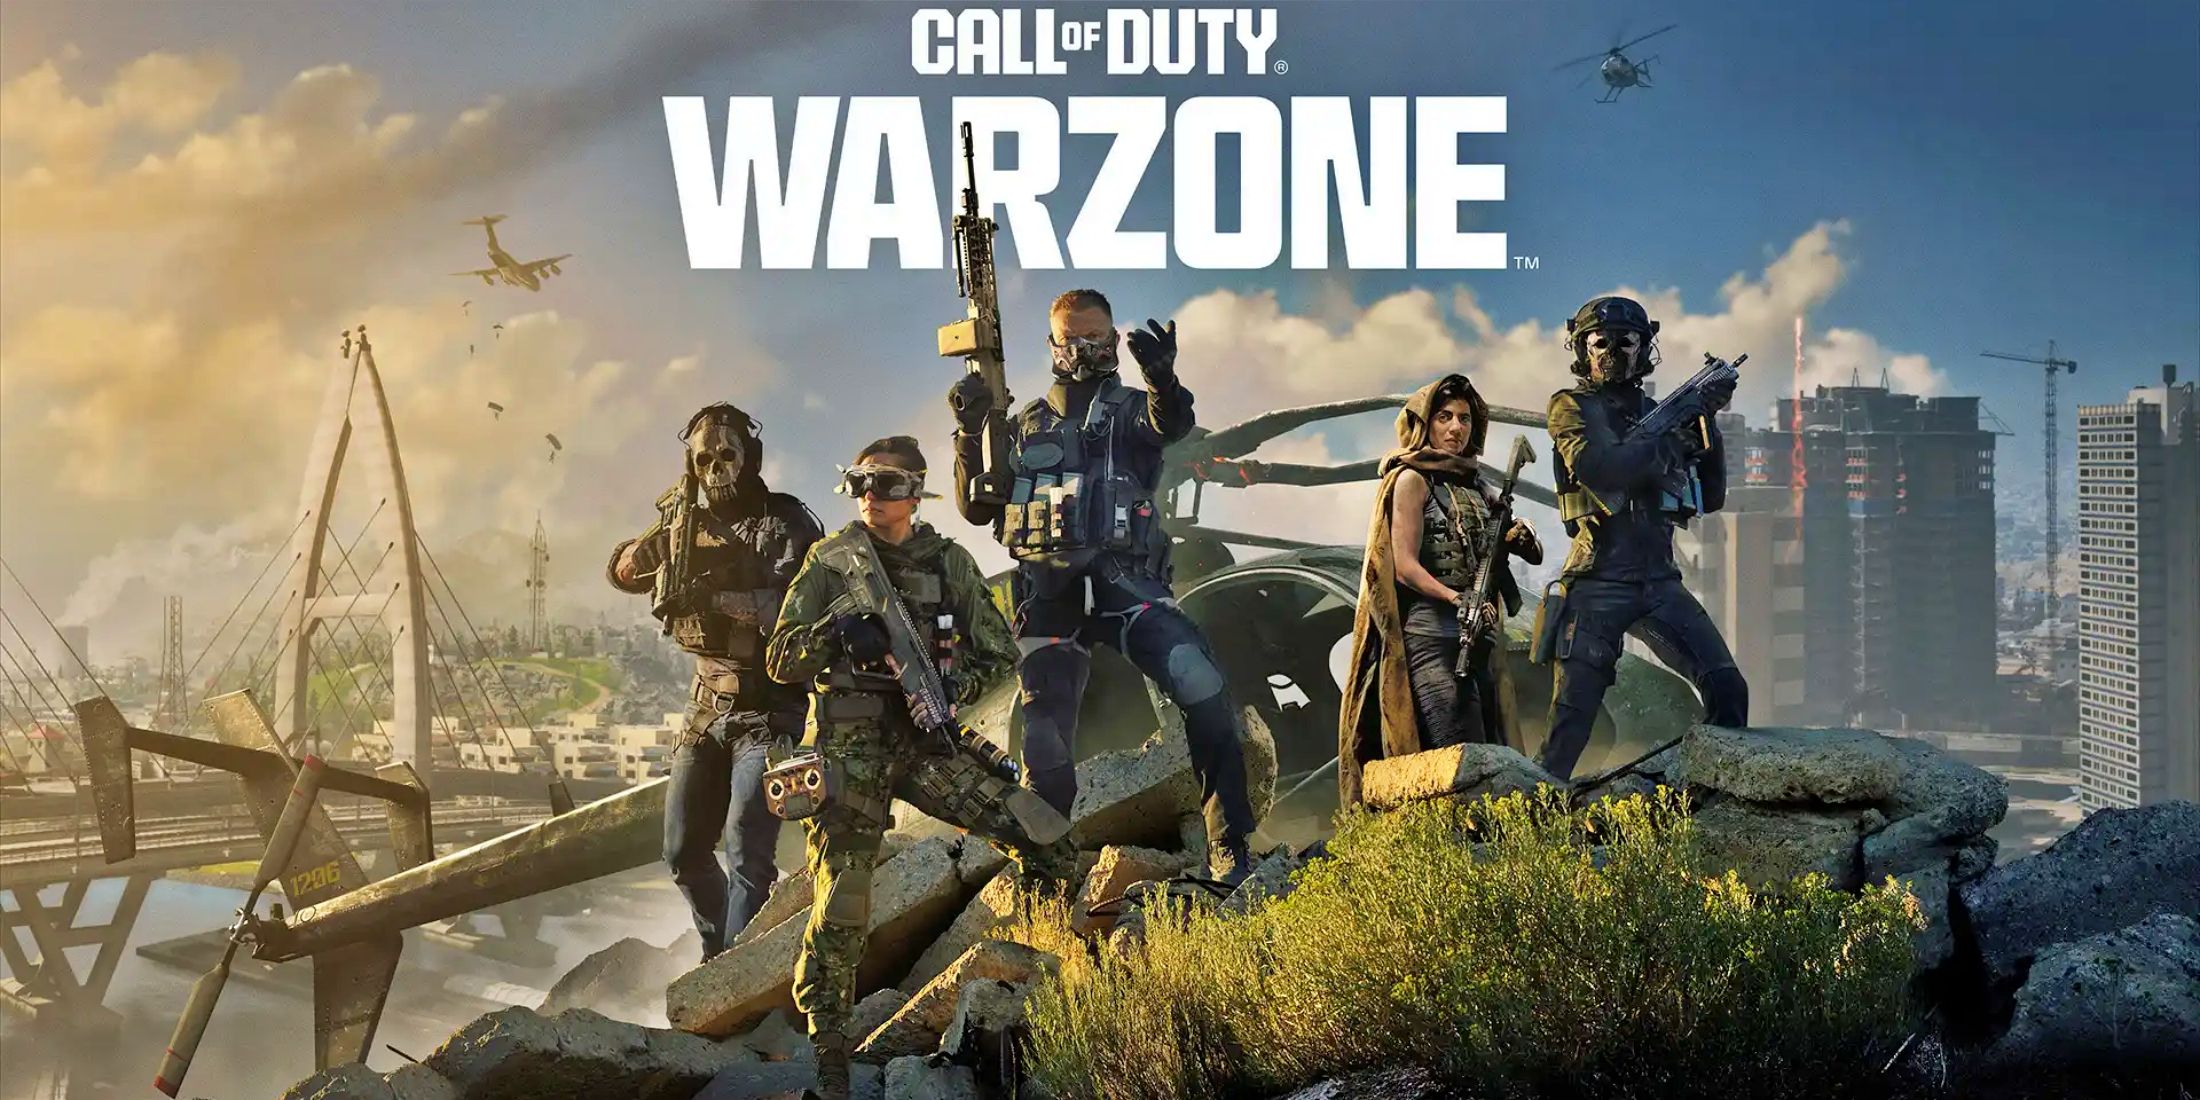 call-of-duty-warzone-official-poster